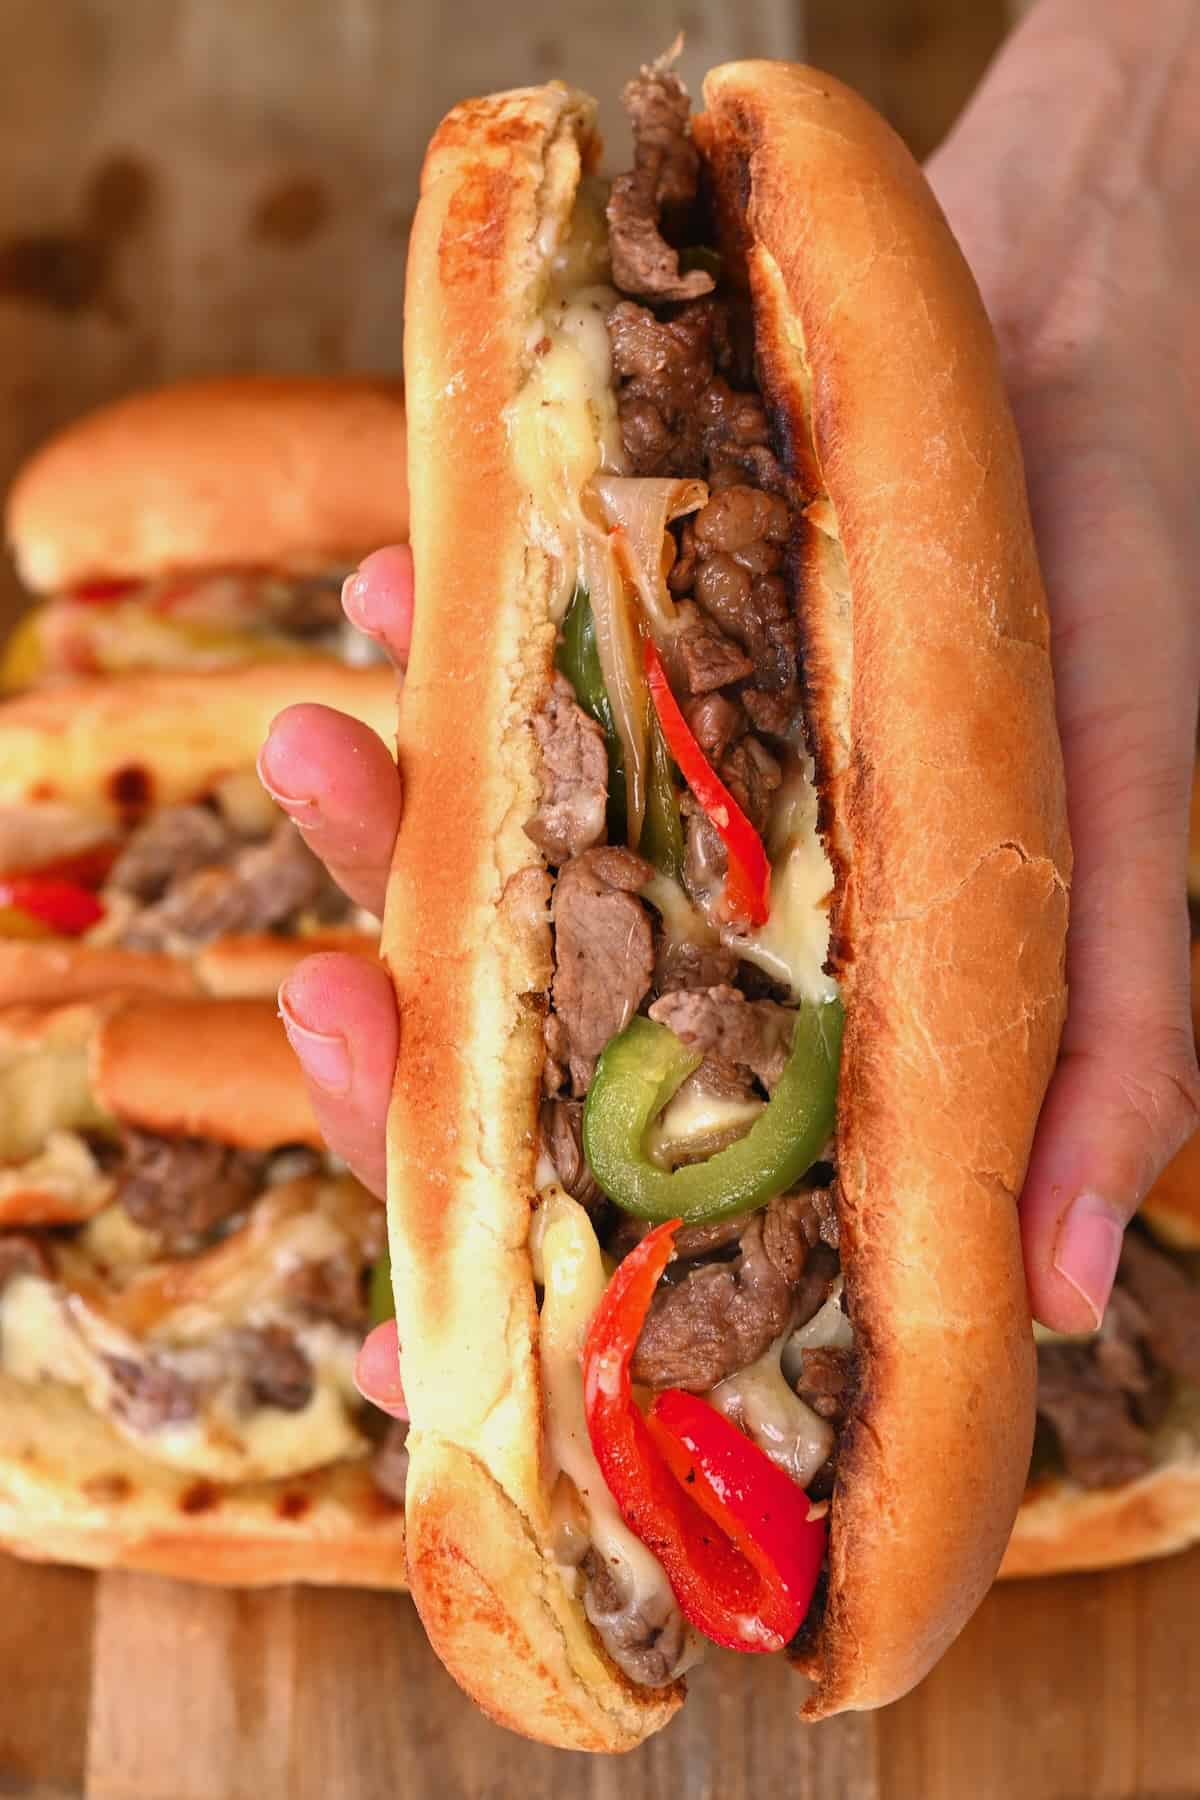 Holding a philly cheesesteak sandwich